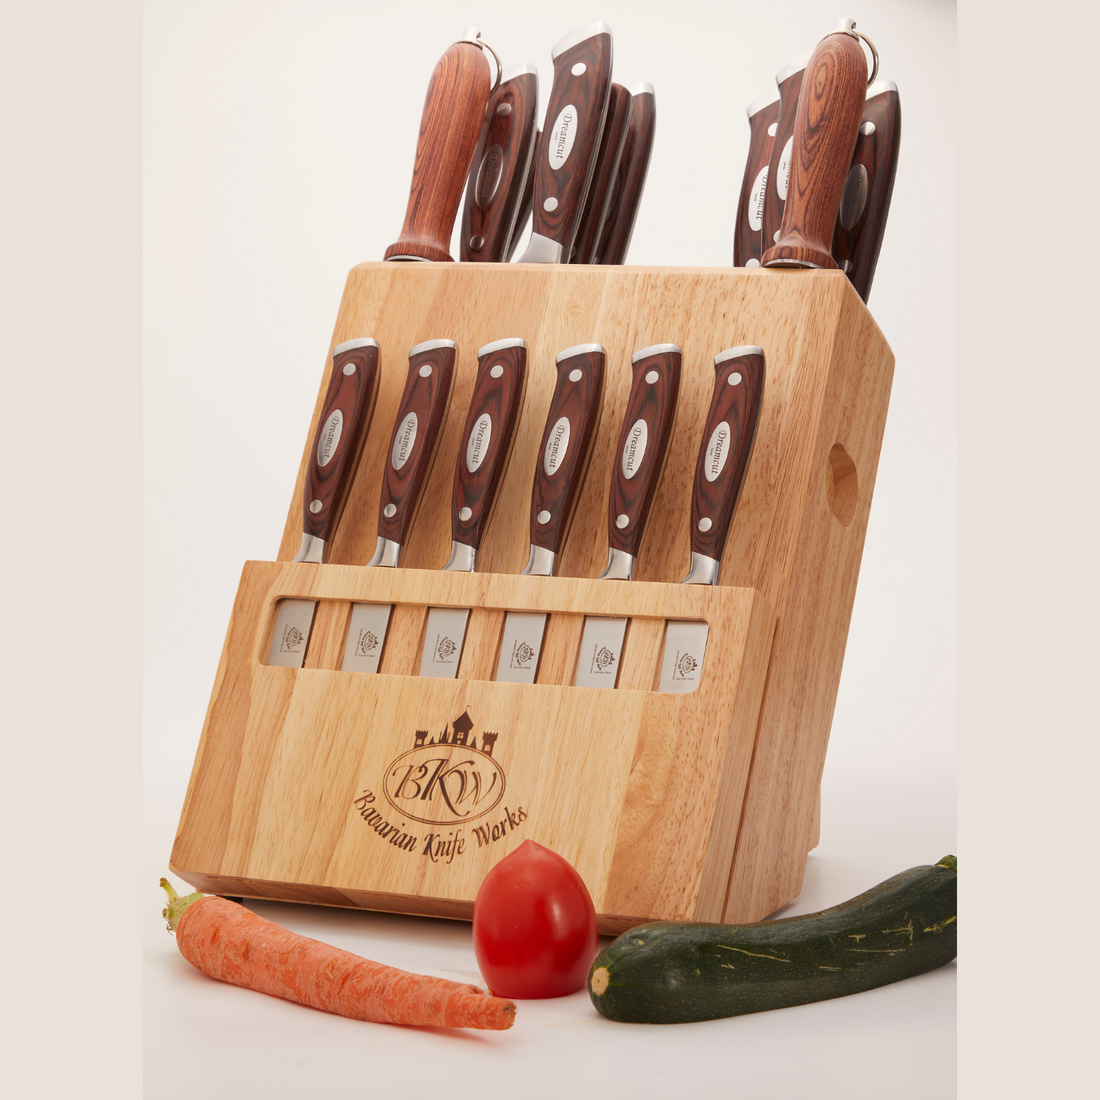 Buy 19 pc set- 12 pc set plus steak knives,  order today and get a free single Knife